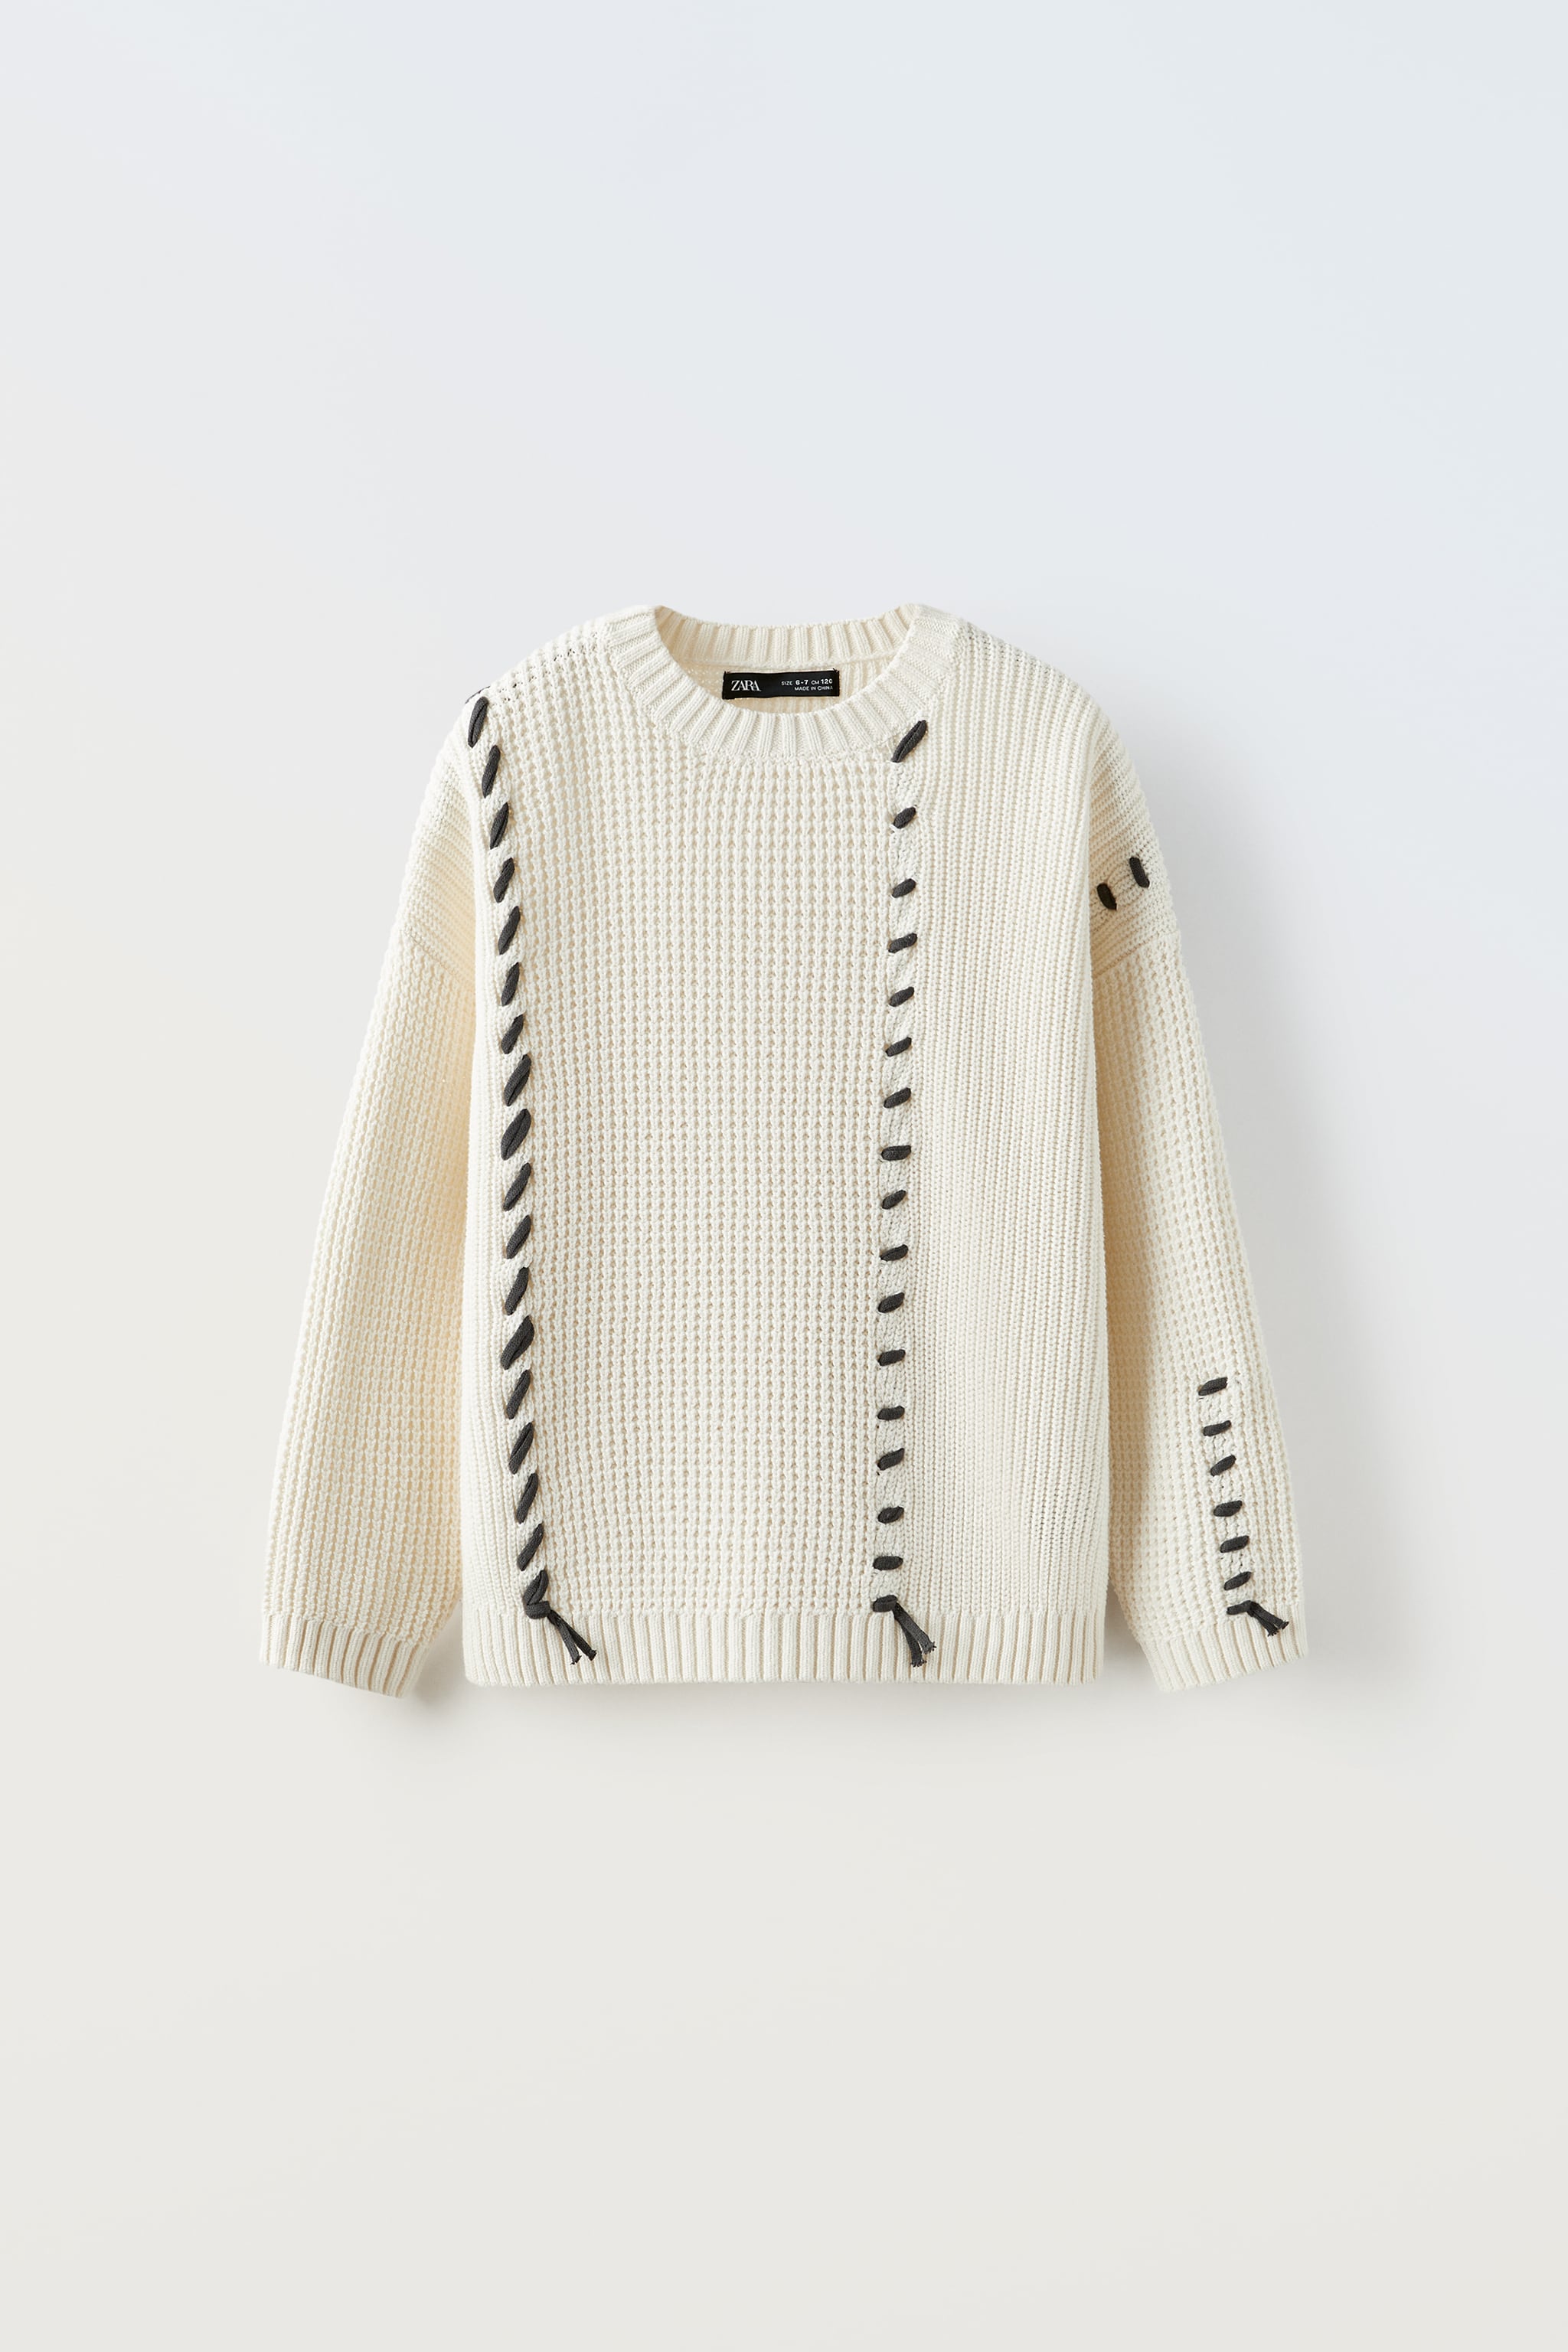 CONTRAST DETAIL SWEATER